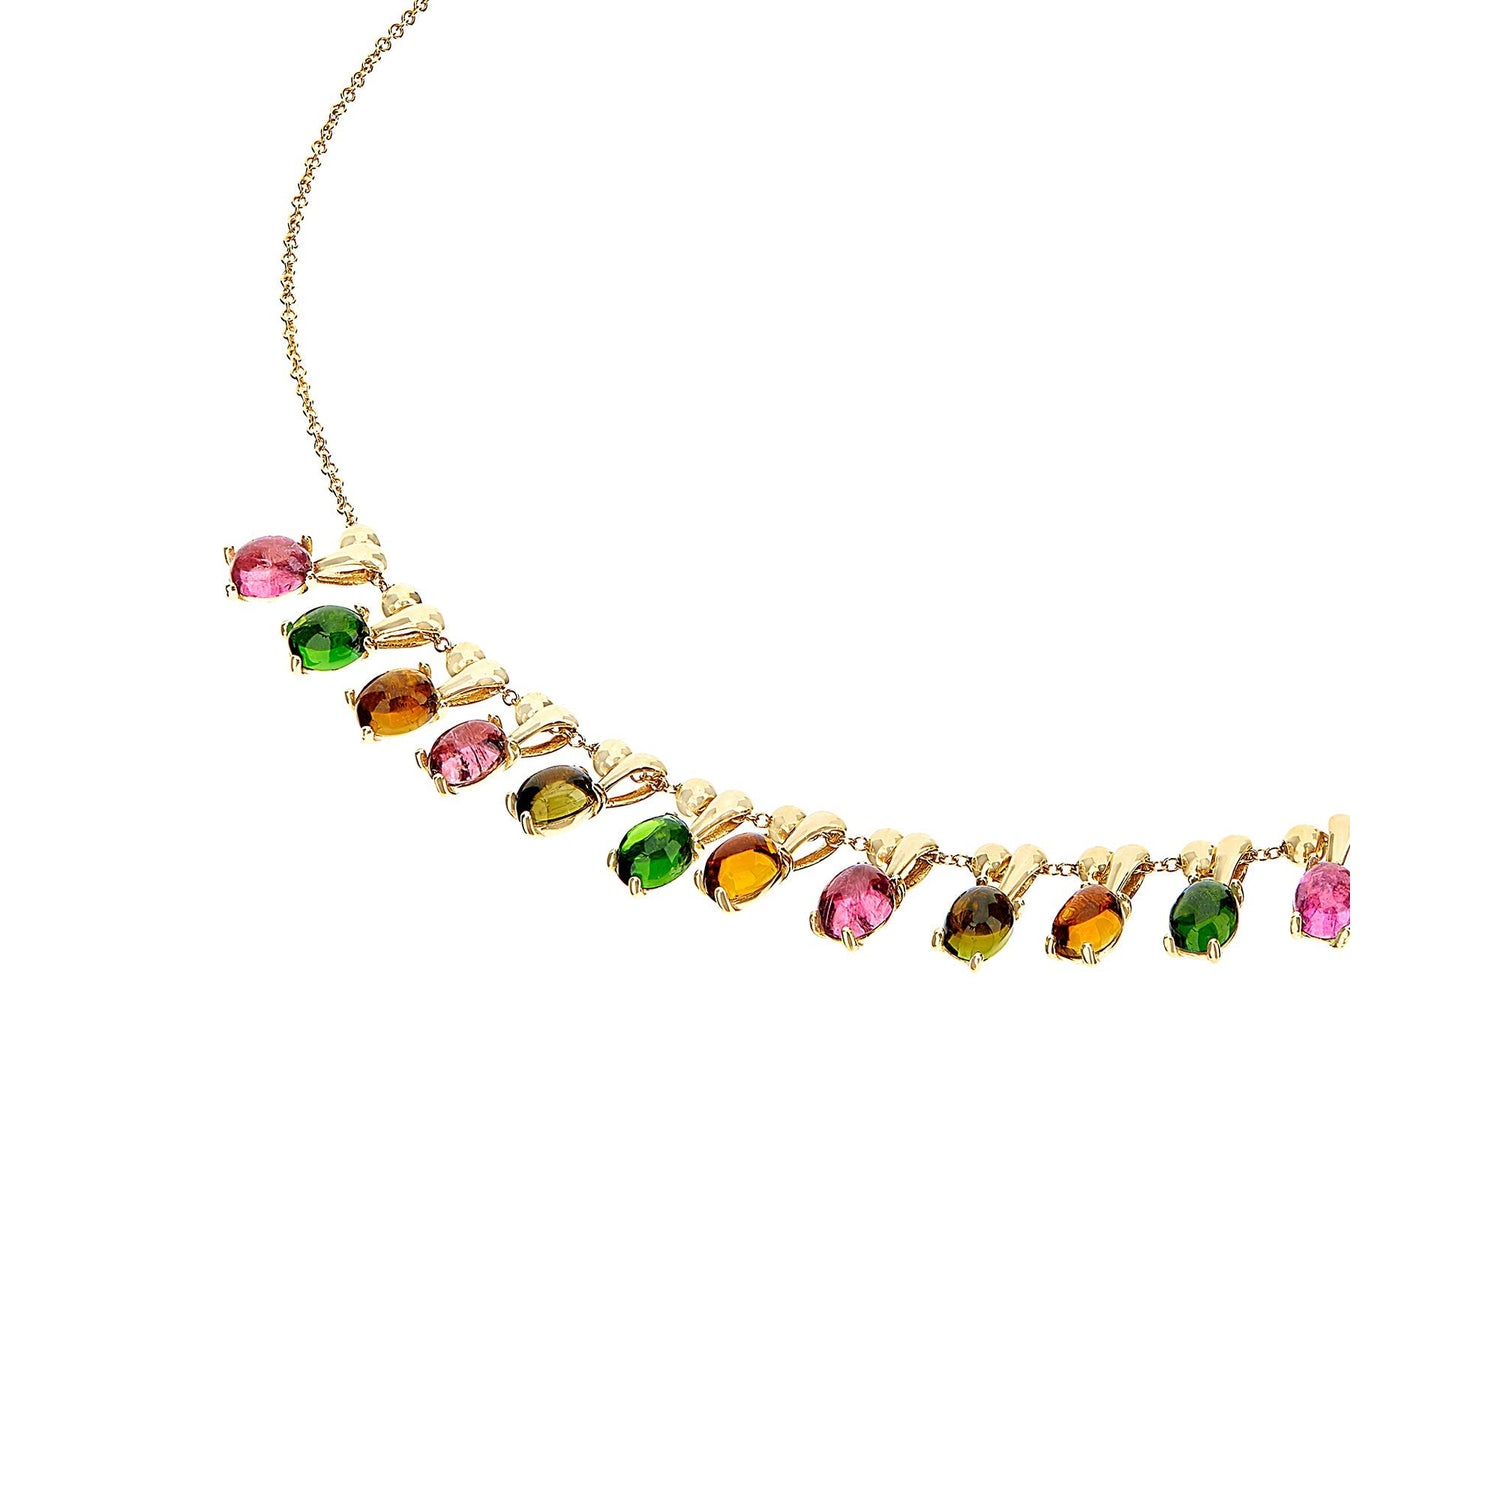 "TOURMALINES" GOLD TOURMALINE COLORFUL COLLAR NECKLACE